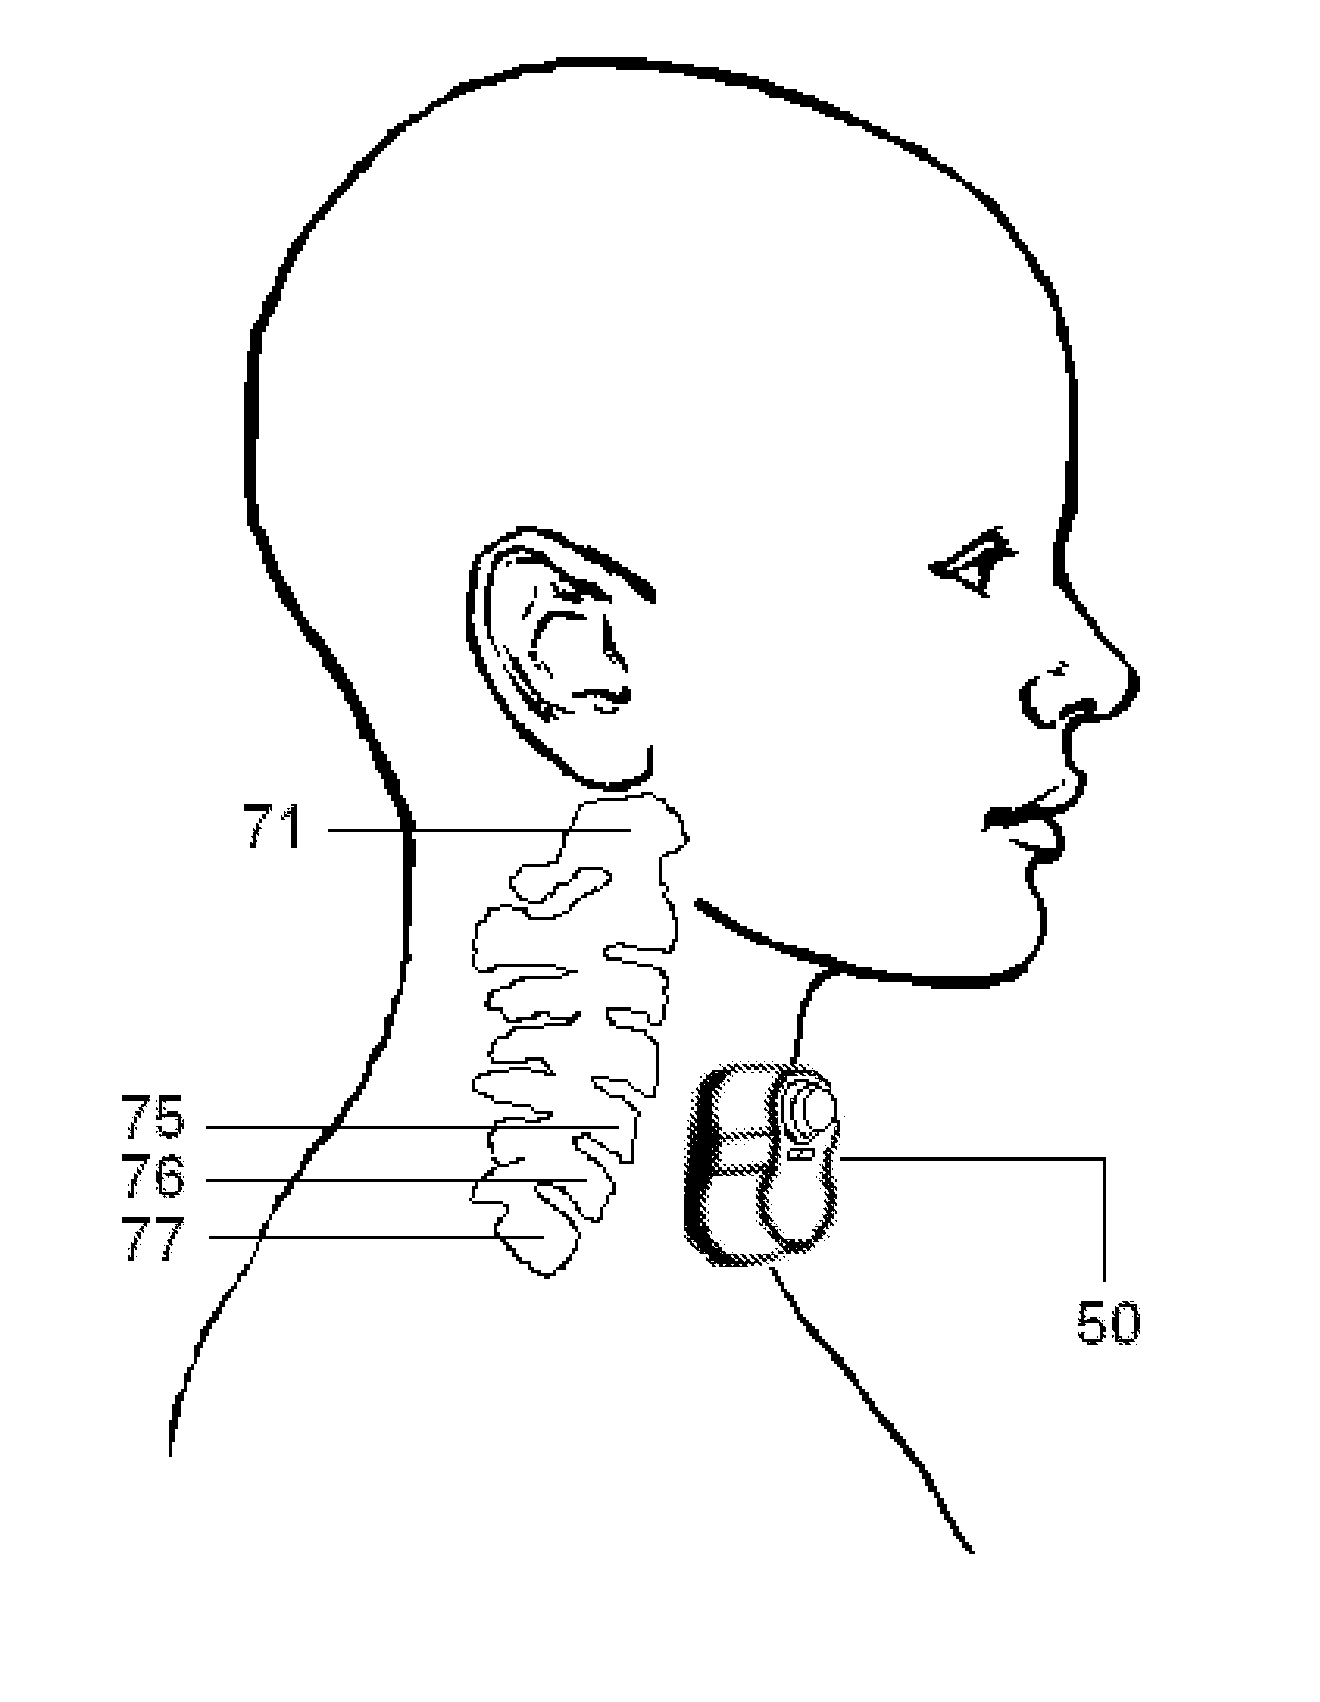 Nerve stimulation methods for averting imminent onset or episode of a disease